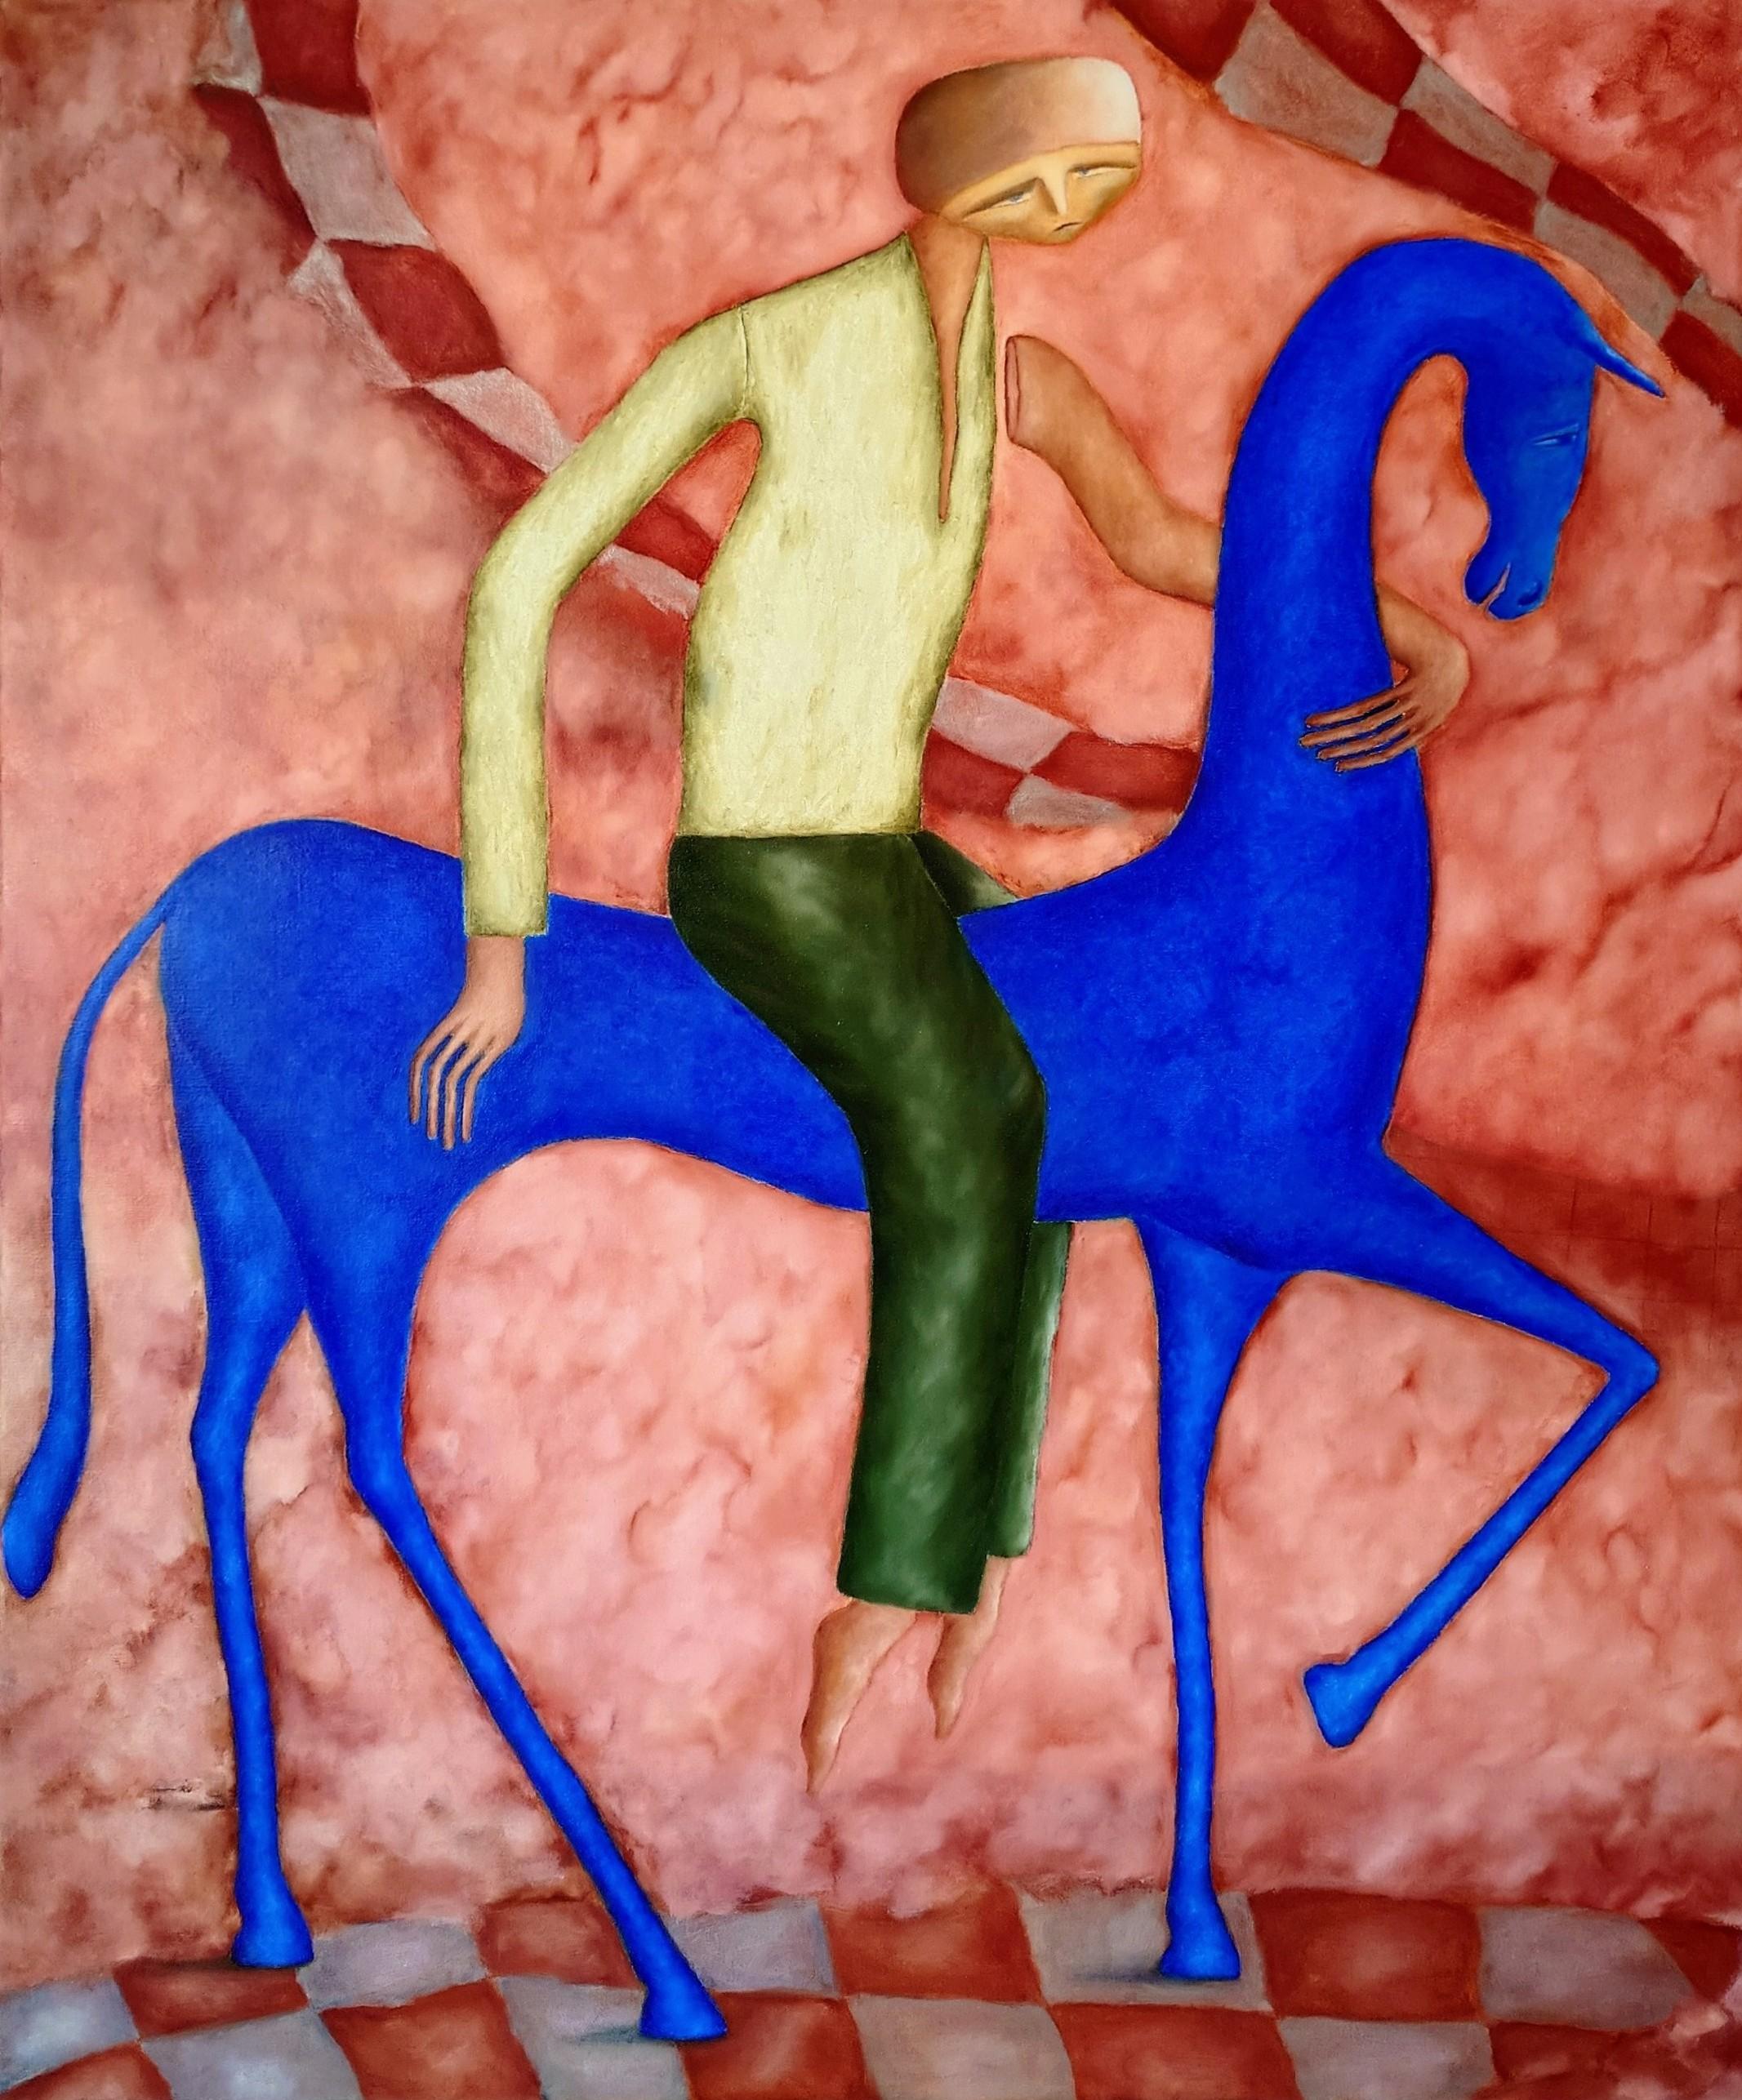 Traveller On A horse - Oil on Canvas Figurative Painting, 2023
Artwork is on supported wooden frame. Ready to hang.

Tam Ess makes oil paintings that explore the subconscious, blending figurative surrealism with balanced compositions that captivate